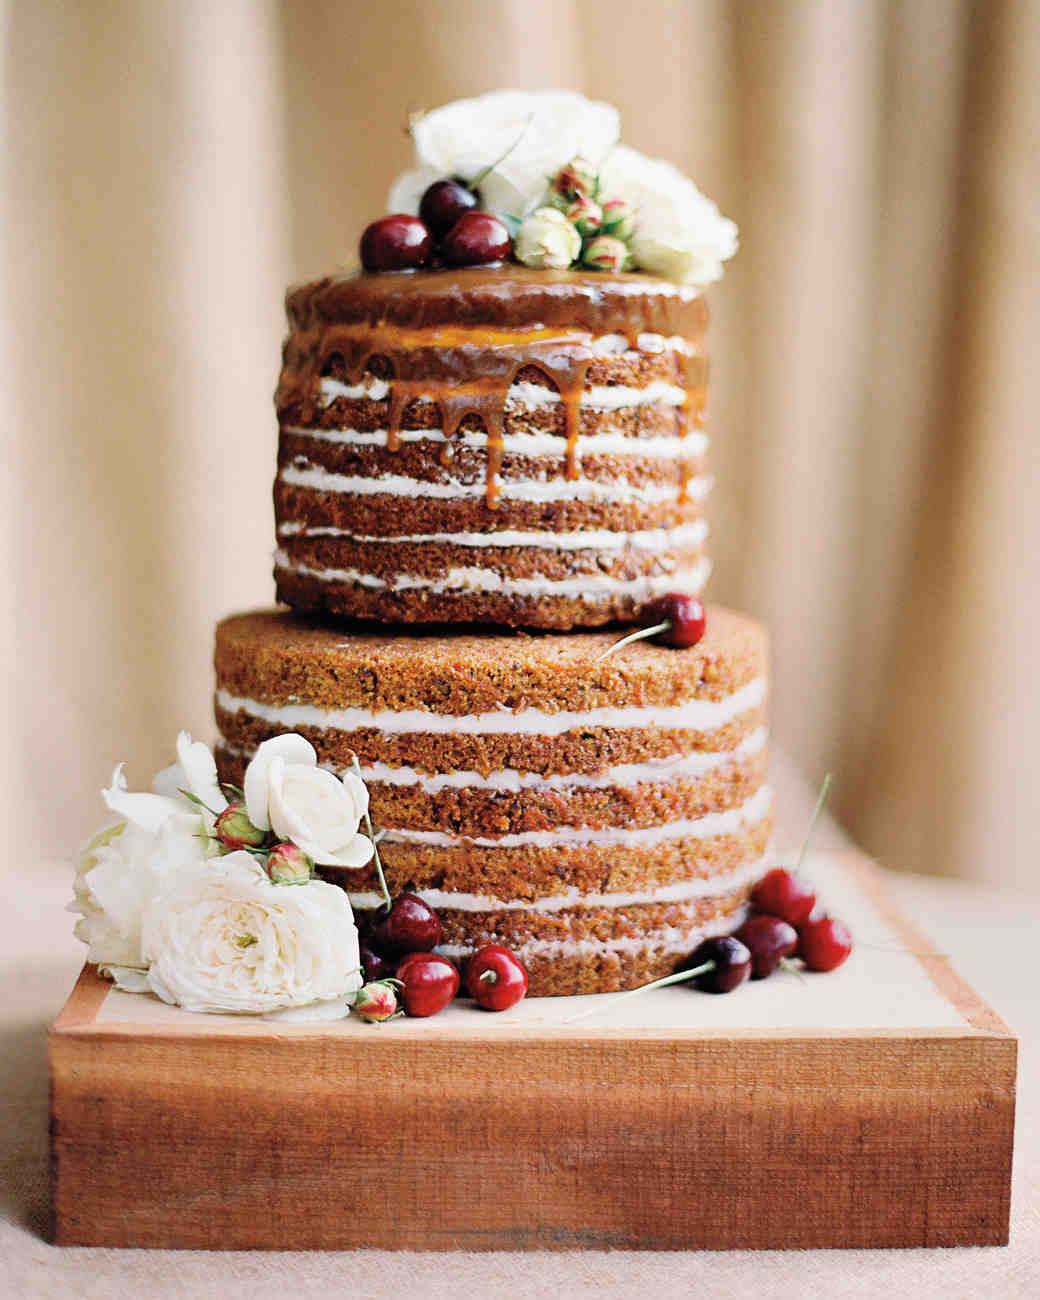 Wedding Cakes Pics
 42 Fruit Wedding Cakes That Are Full of Color and Flavor